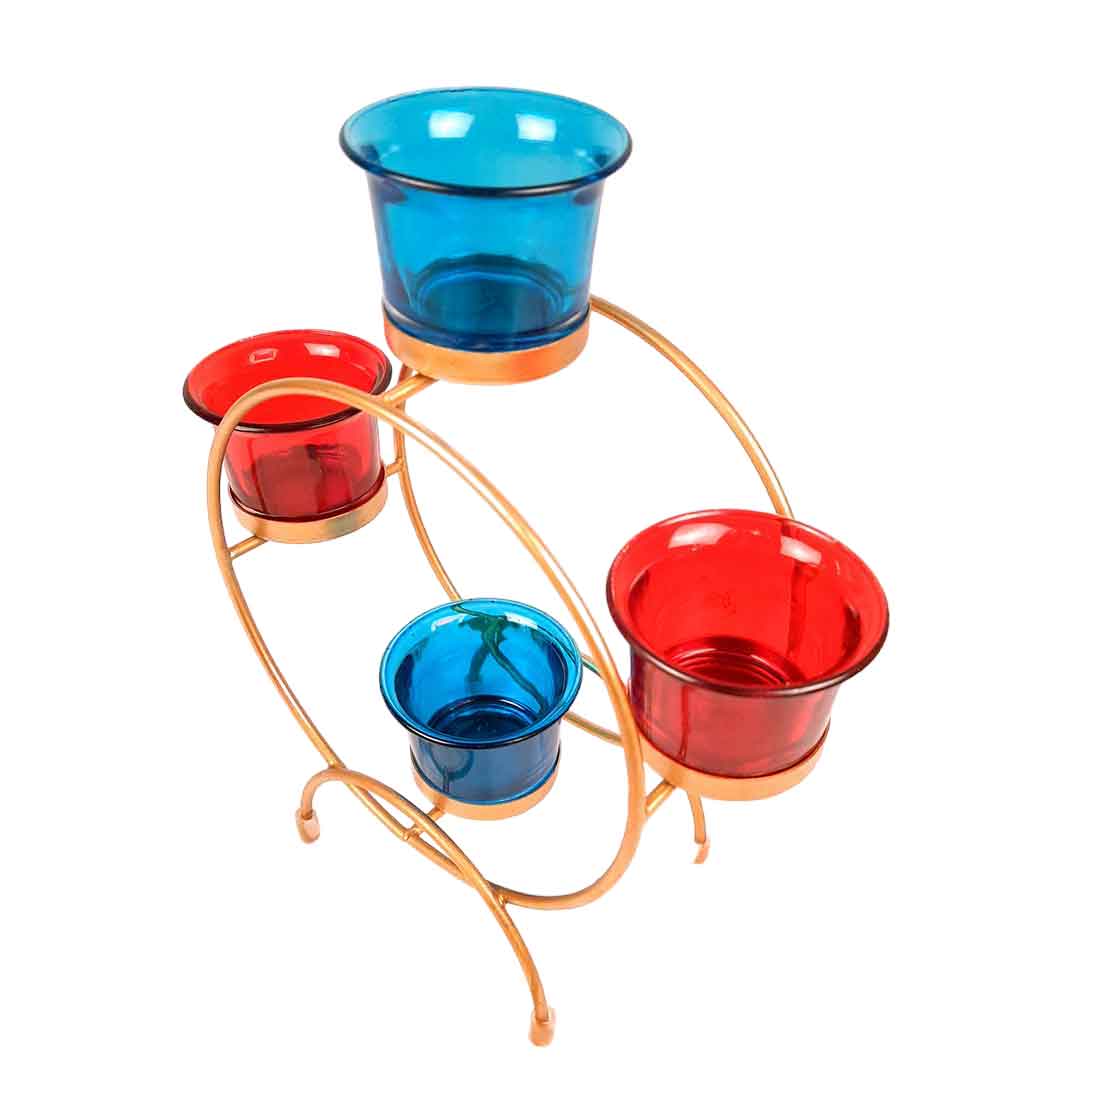 Tea Light Holder with 4 Glass Cups & Candle Holder Stand - For Home Decor, Table Decor & Gifts - 9 Inch - Apkamart